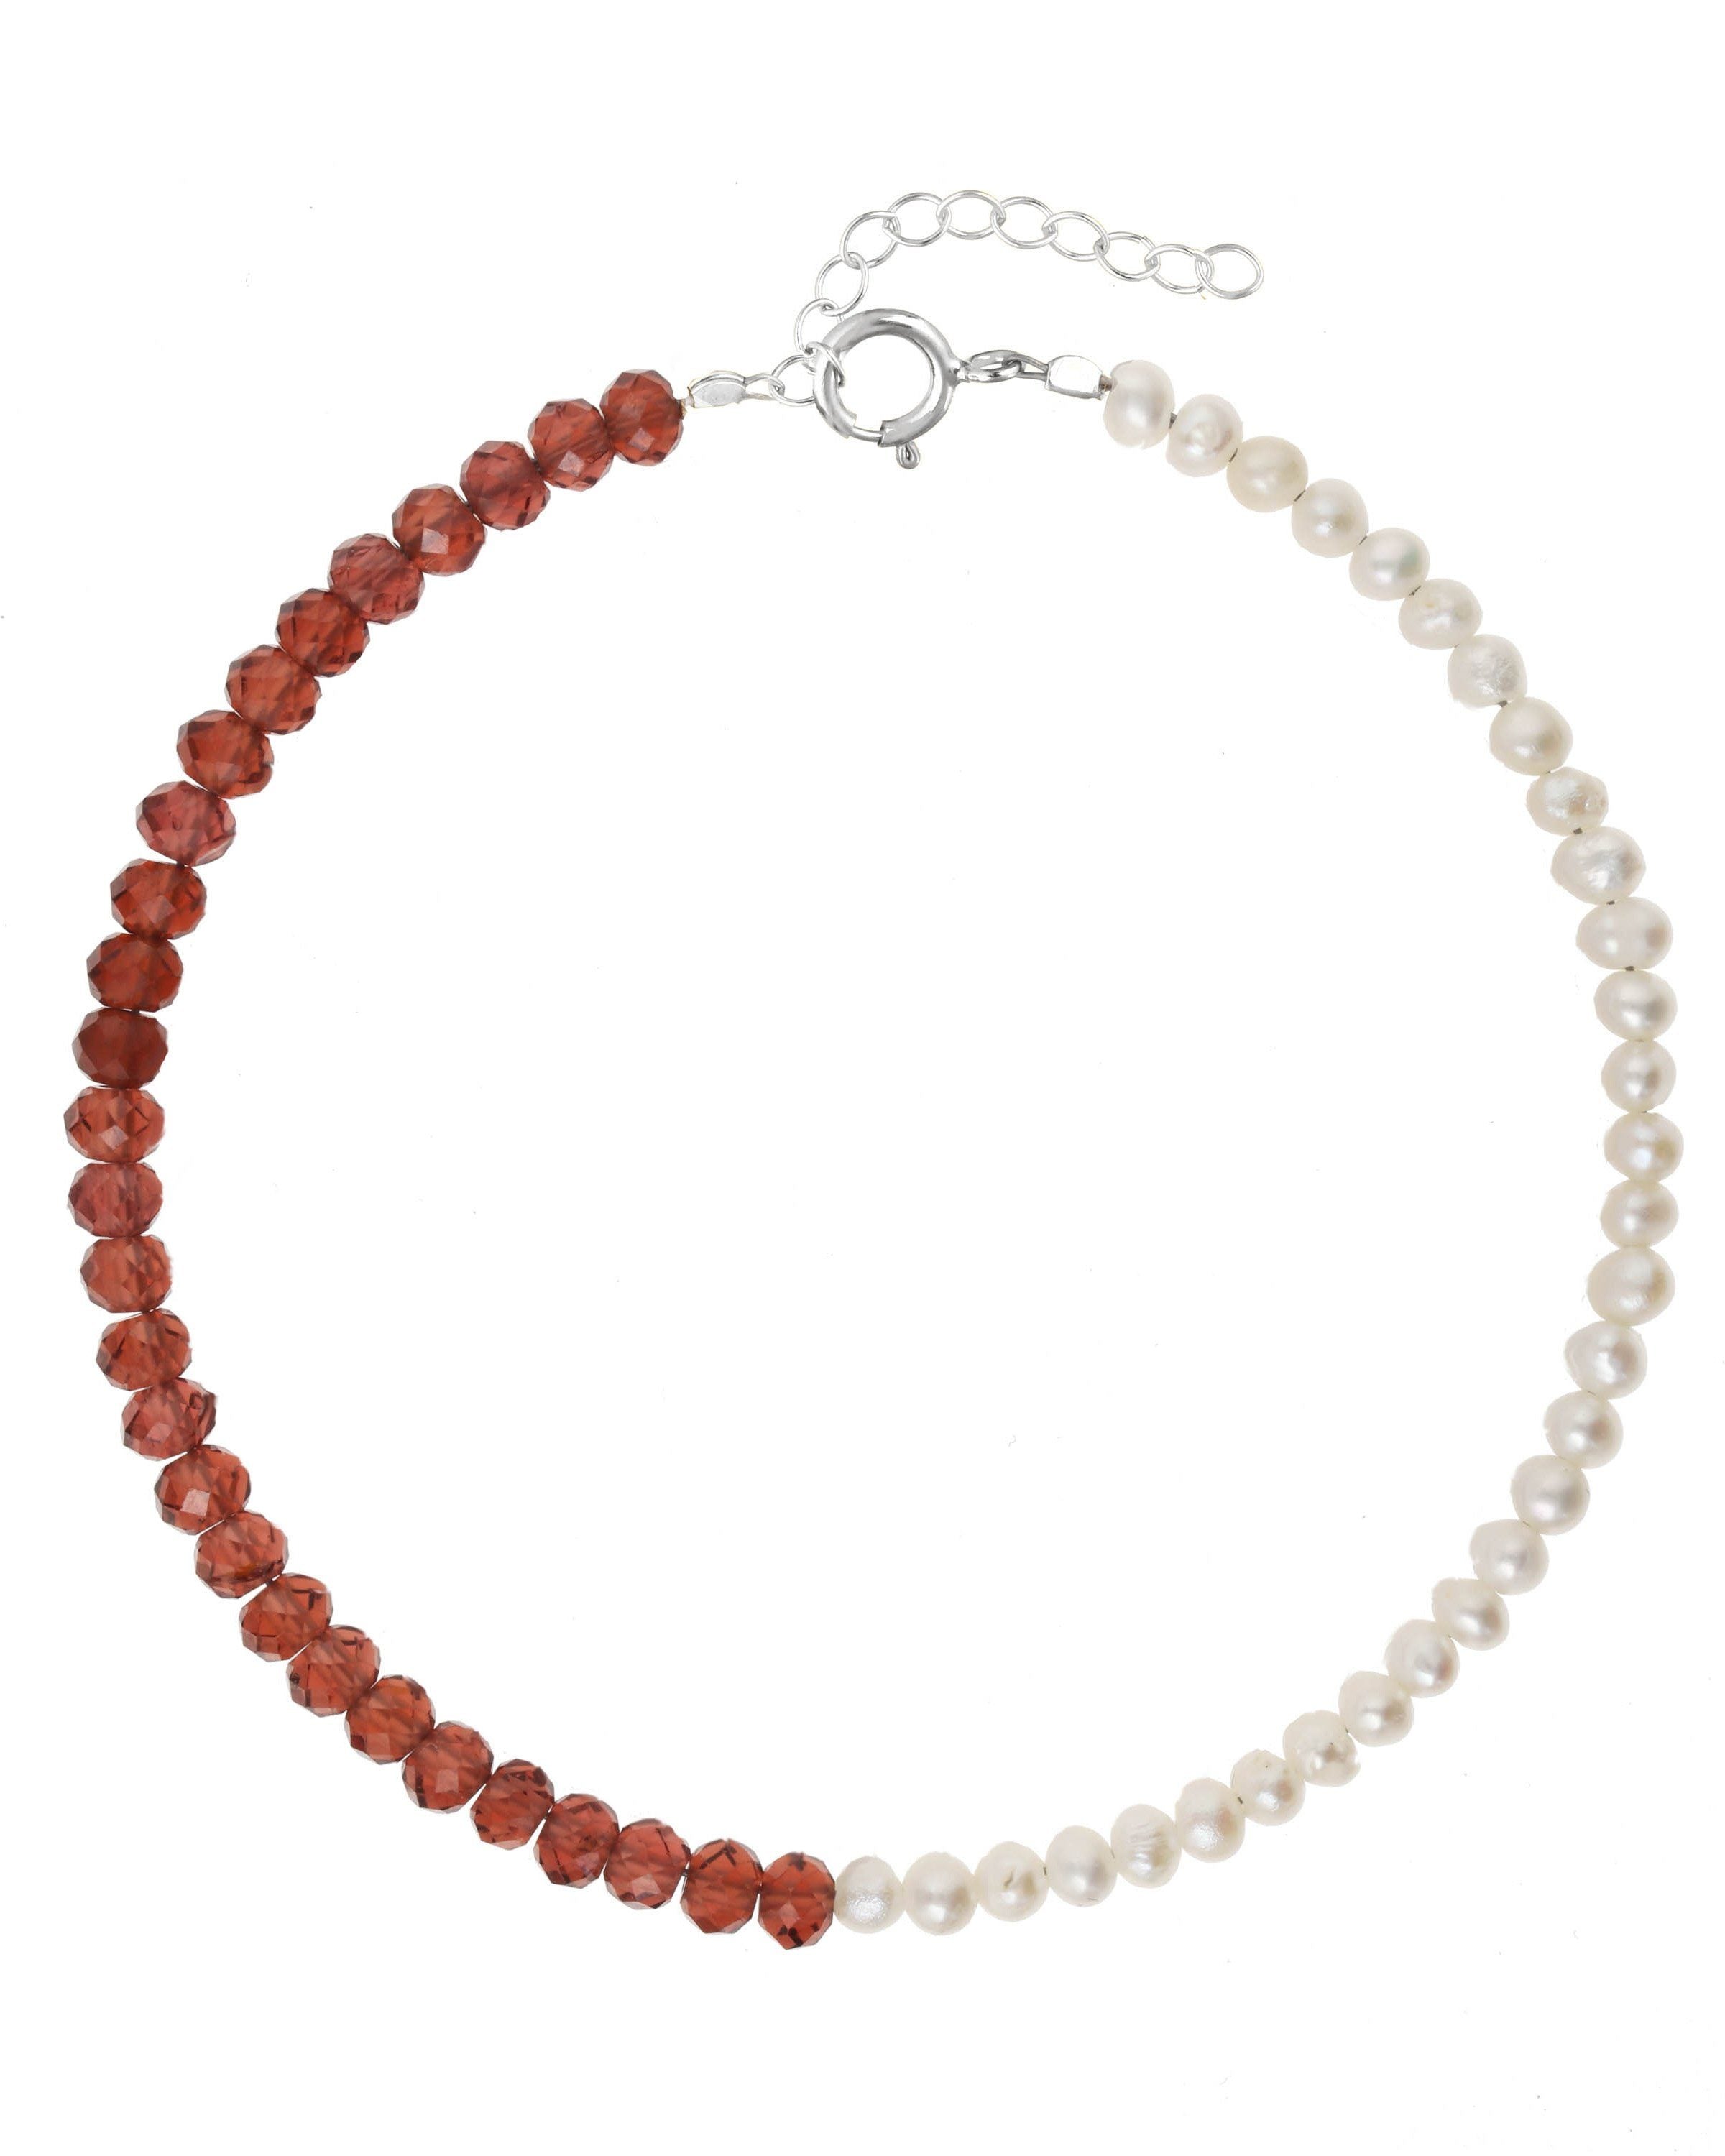 Elo Bracelet by KOZAKH. A 6 to 7 inch adjustable length bracelet, crafted in Sterling Silver. Half of the bracelet strand features 3.5mm Freshwater Pearls and 3.5mm Faceted Garnet beads on the other half.